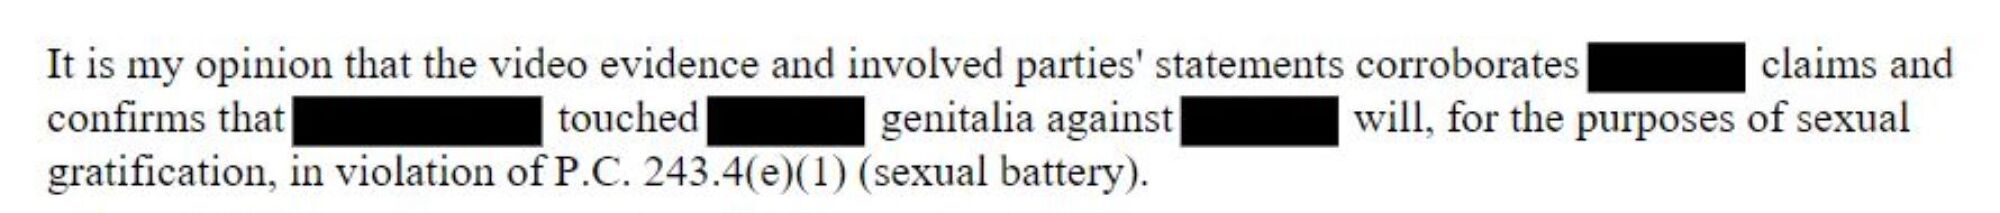 Text from a report says a detective believes that the evidence supports a detainee's claims of sexual battery